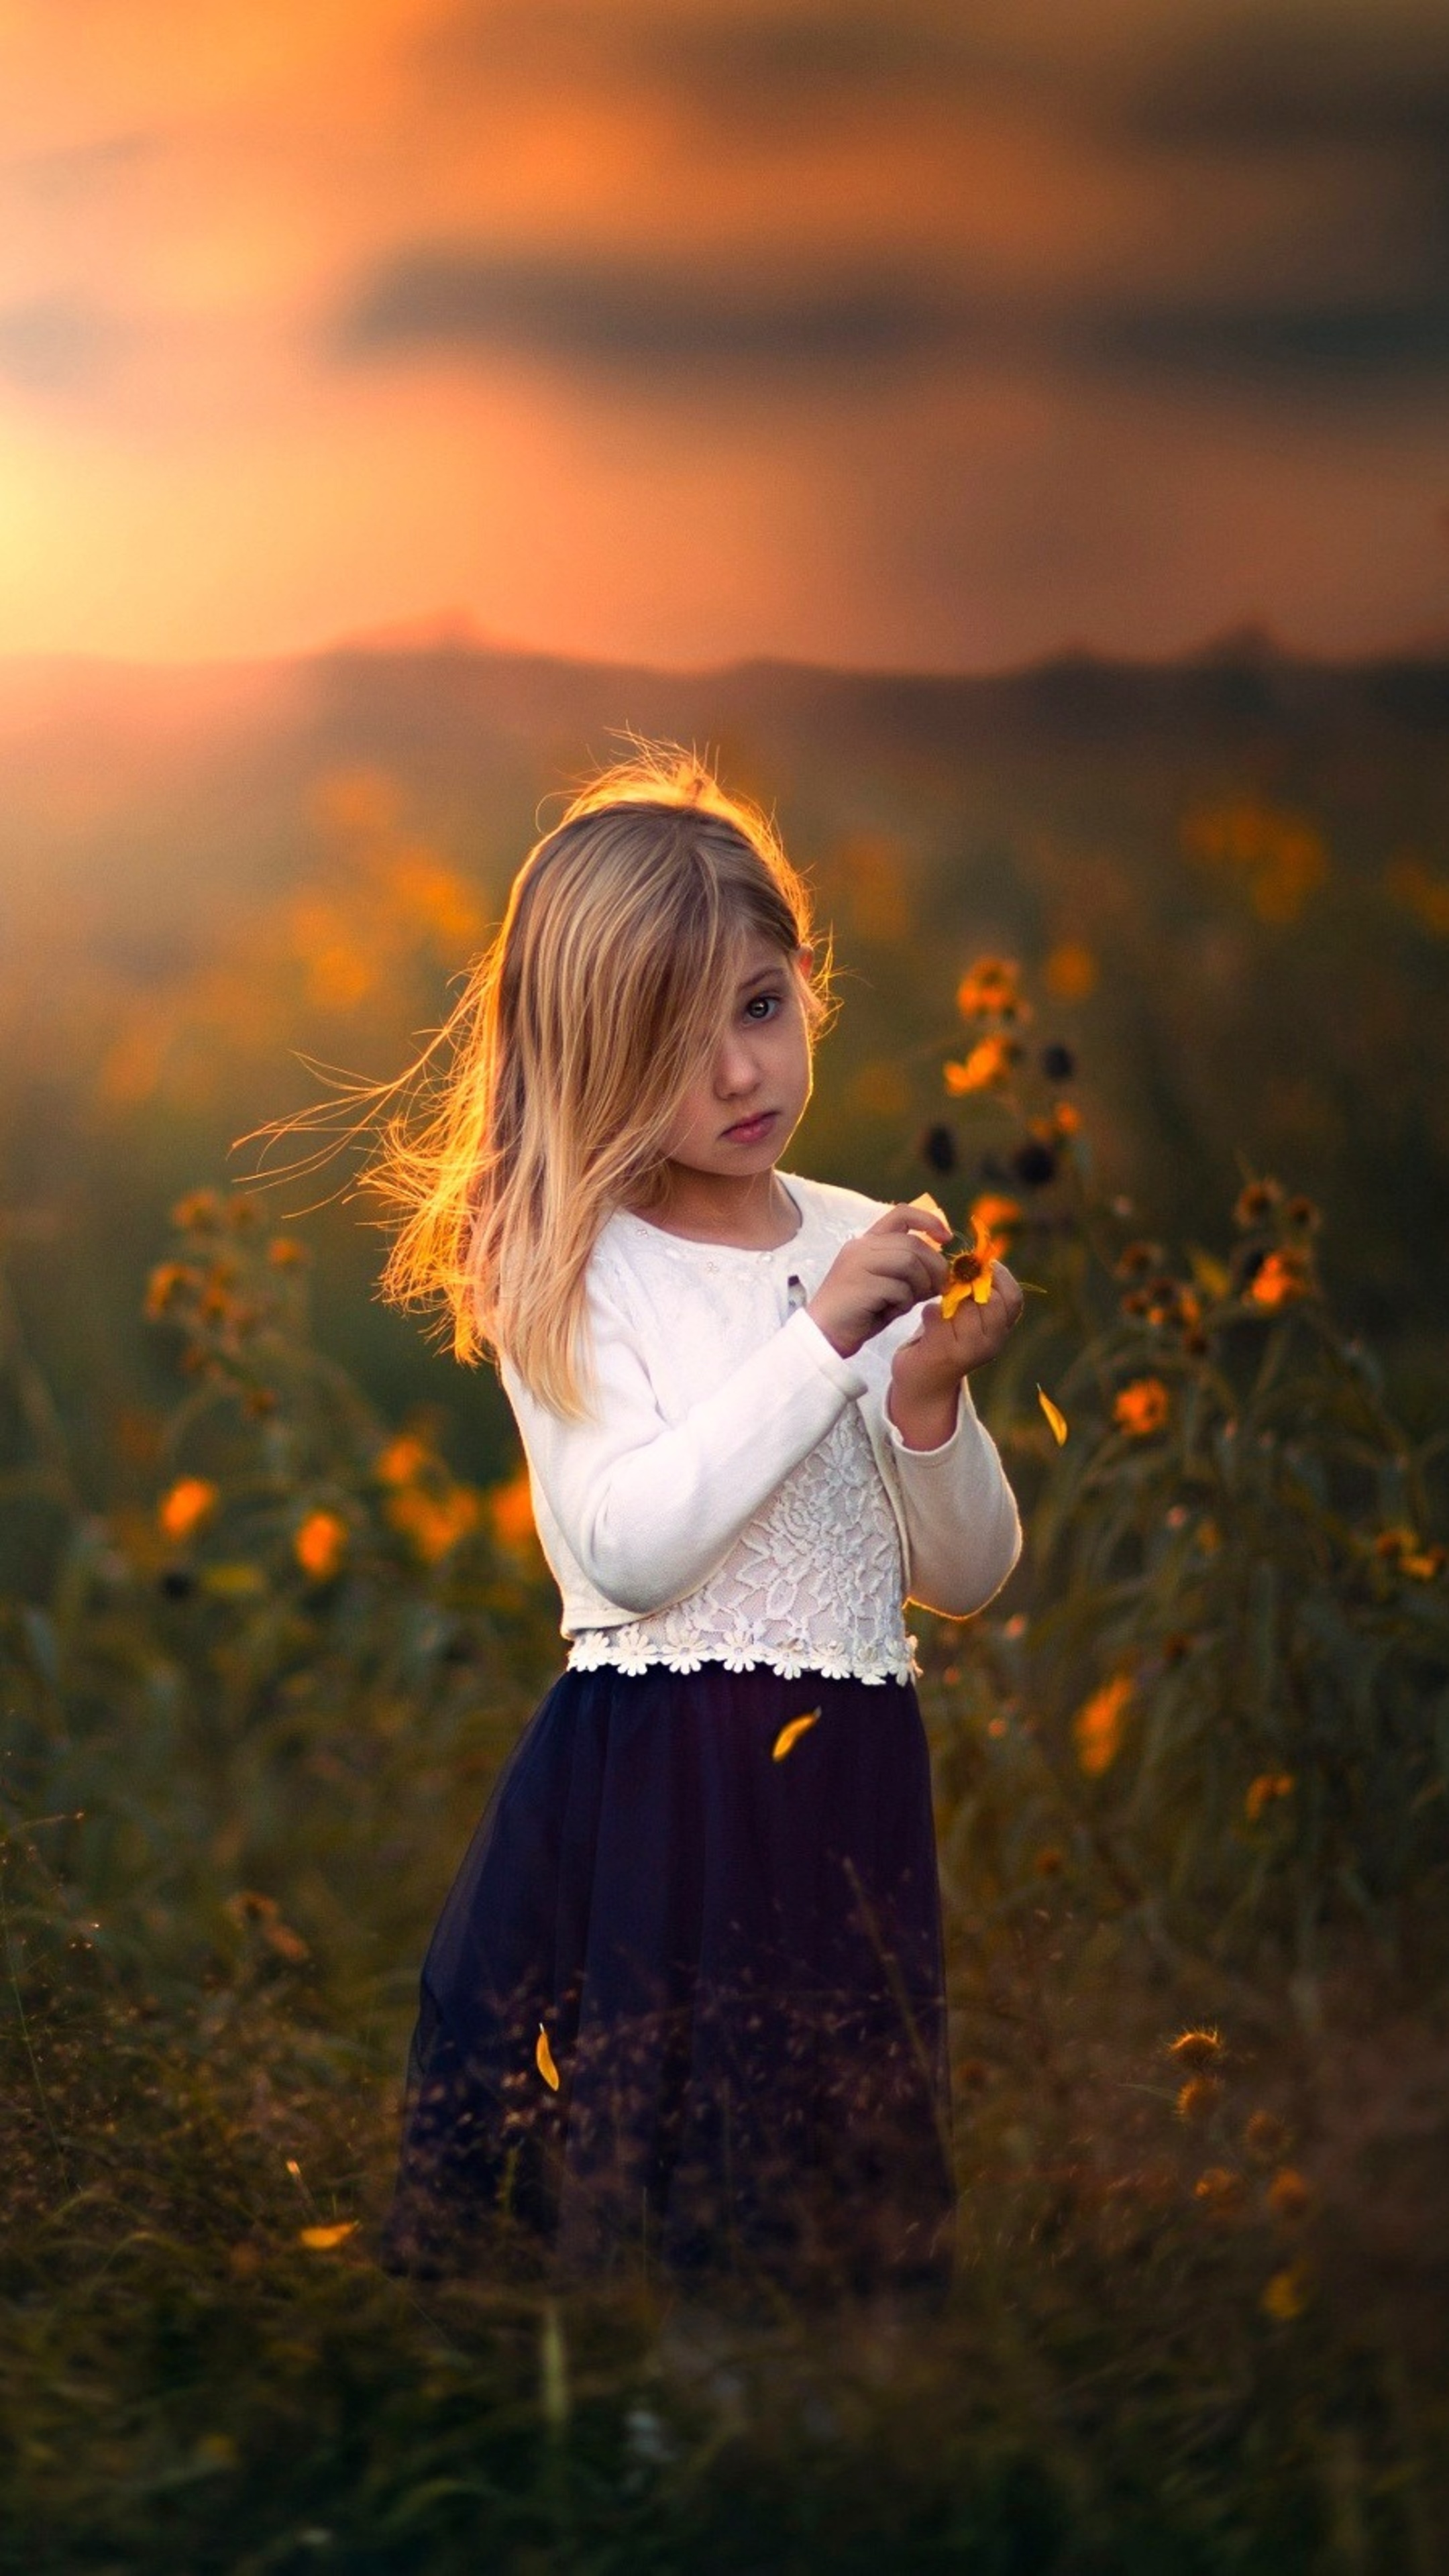 2160x3840 Cute Child Girl With Flowers Outdoors Sony Xperia X,XZ,Z5 Premium  HD 4k Wallpapers, Images, Backgrounds, Photos and Pictures